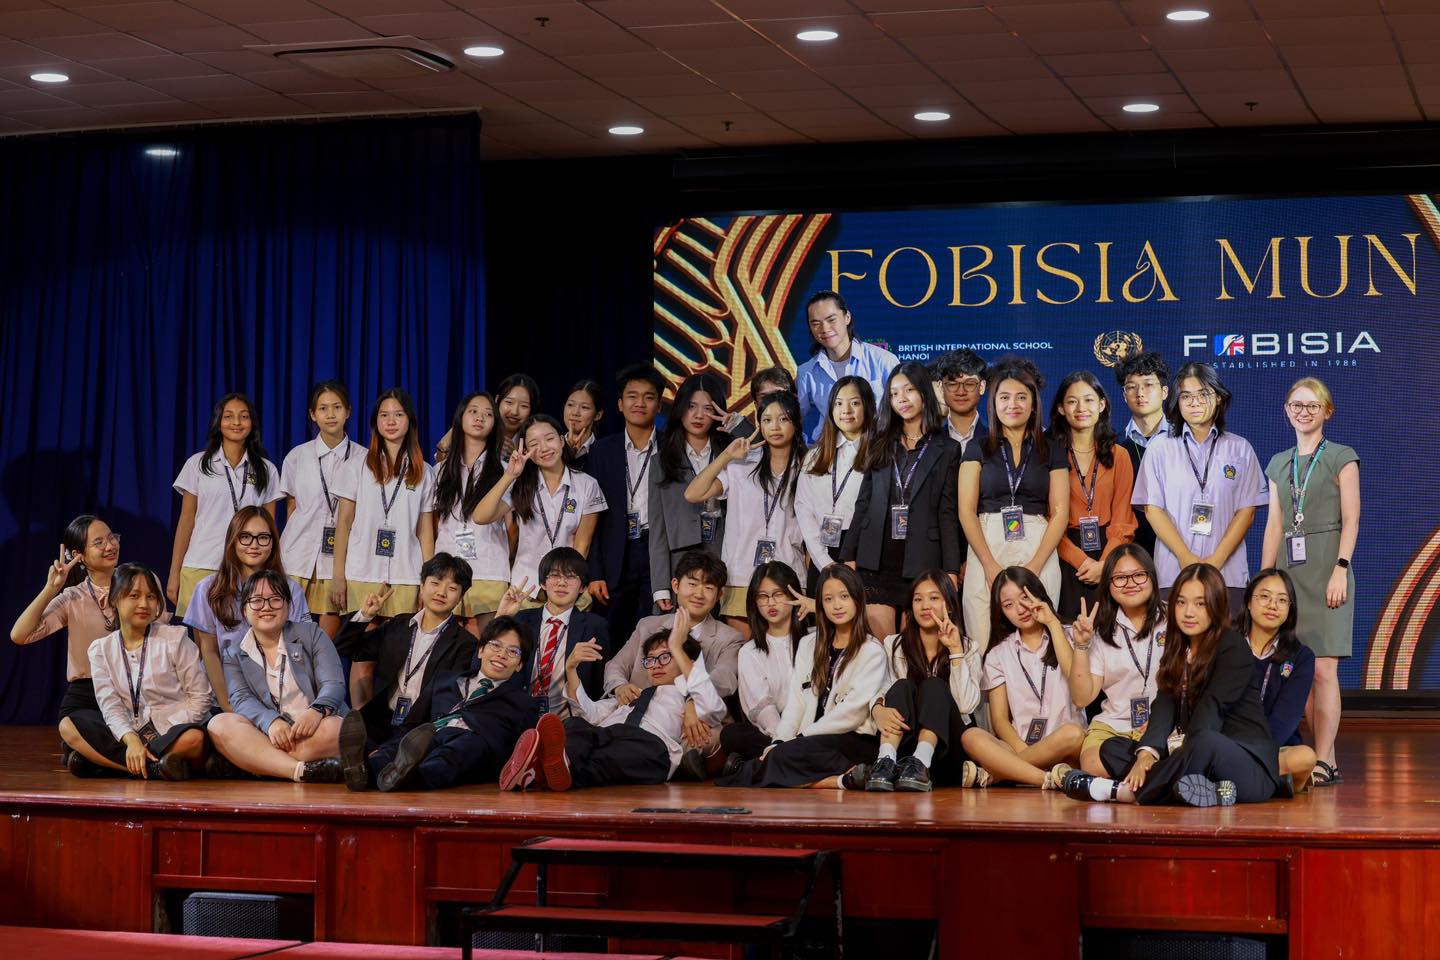 The Leaders of Tomorrow: BIS Hanoi Hosts the FOBISIA Model United Nations (MUN) - The Leaders of Tomorrow BIS Hanoi Hosts the FOBISIA Model United Nations